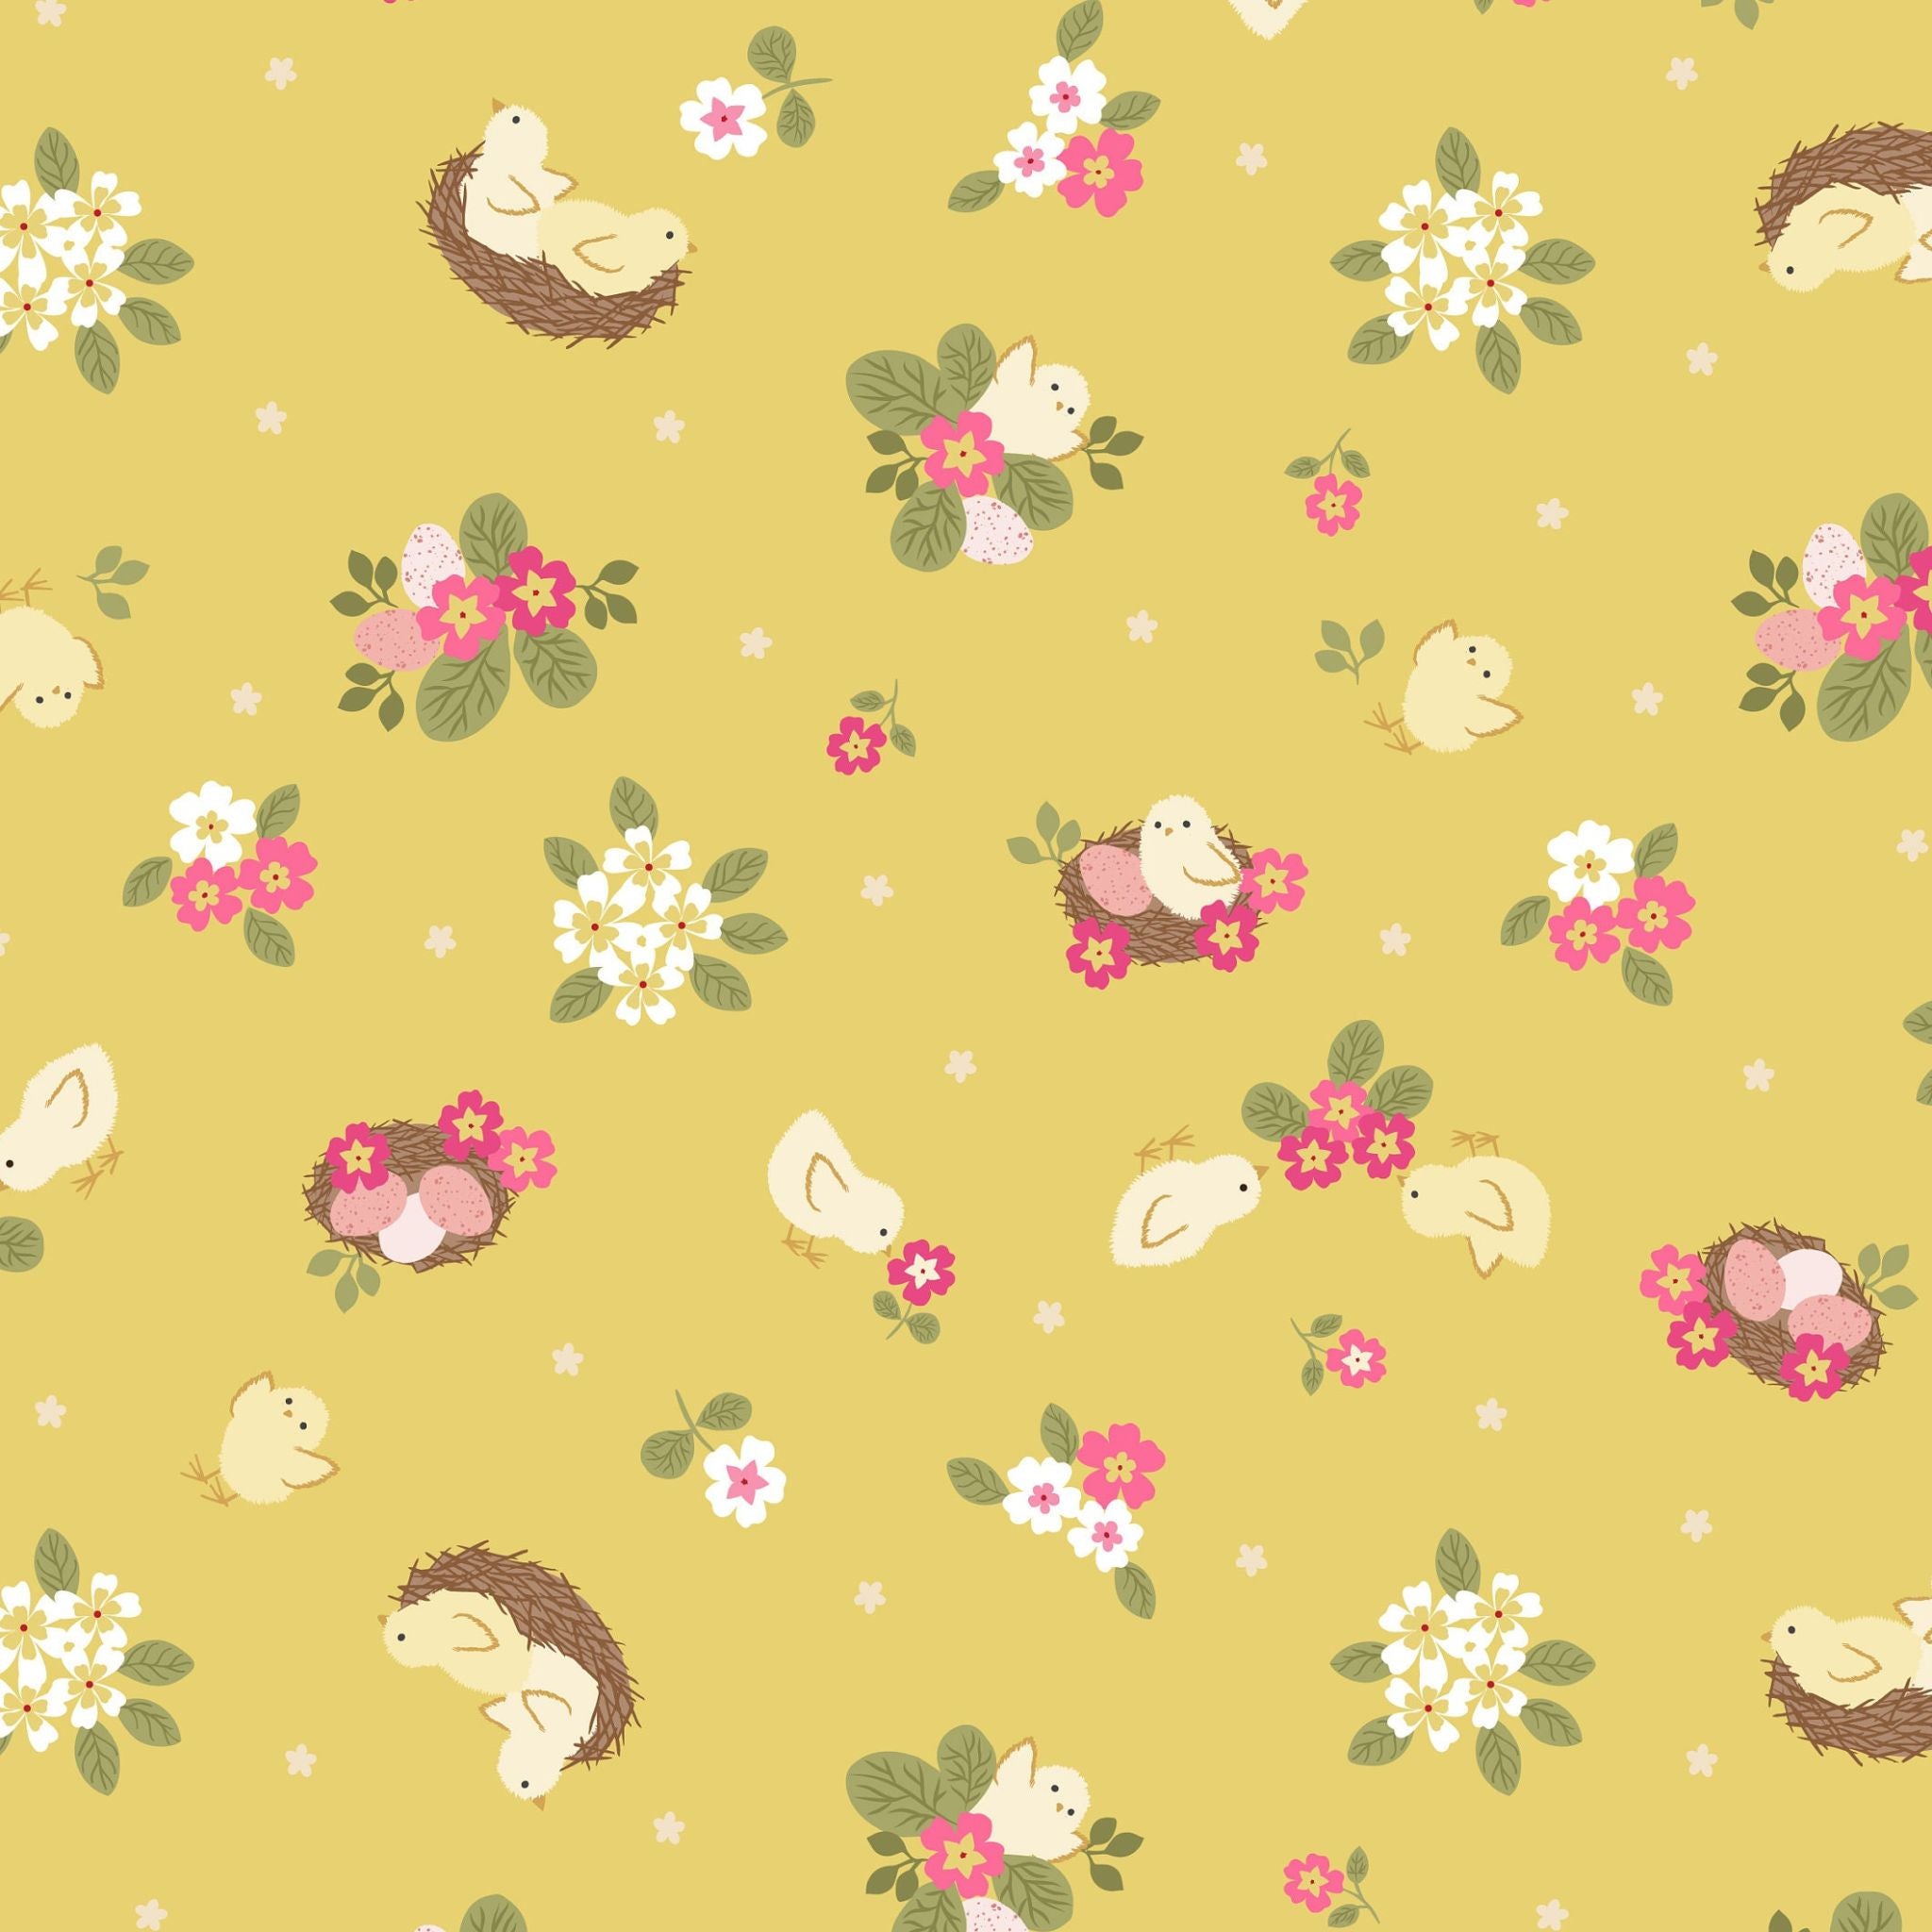 Chicks and nests on a floral yellow cotton fabric - Bunny Hop by Lewis and Irene.